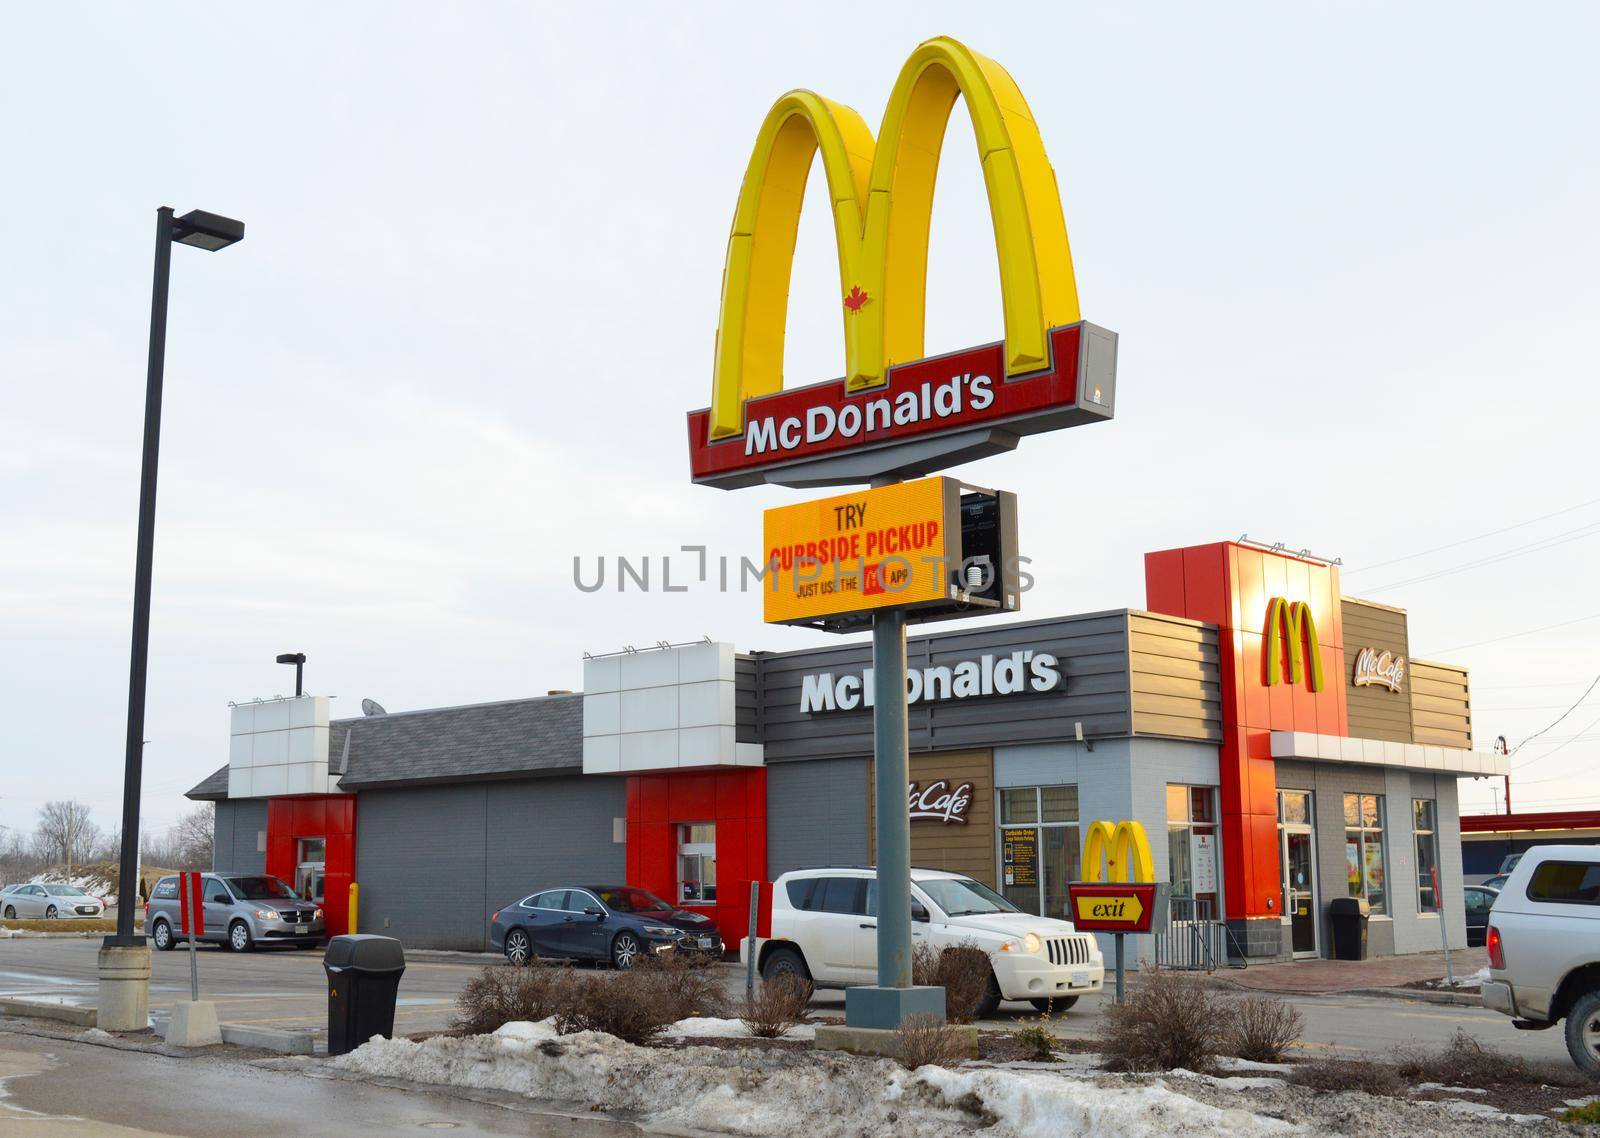 SMITHS FALLS, ONTARIO, CANADA, MARCH 10, 2021: The exterior view of a McDonalds restaurant located in the small town of Smiths Falls, ON, during the late winter season.